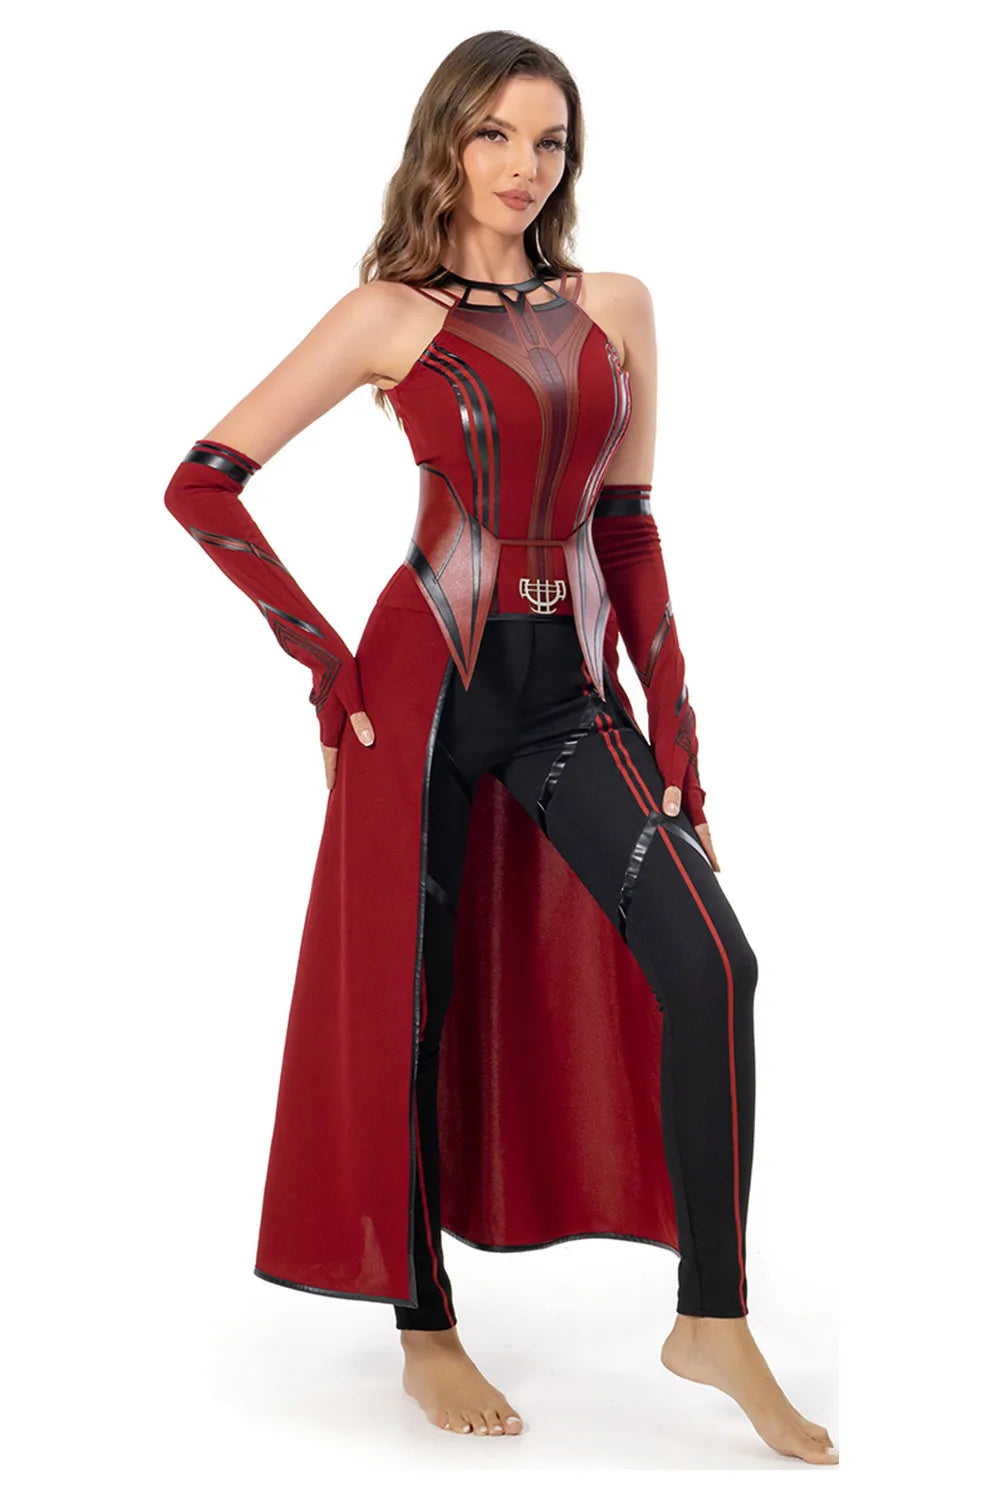 Halloween Witch Cosplay Costumes Suit Women Sleeveless Dress With Pants Belt Gloves Scarlet Color Elastic PU Leather Outfit Set